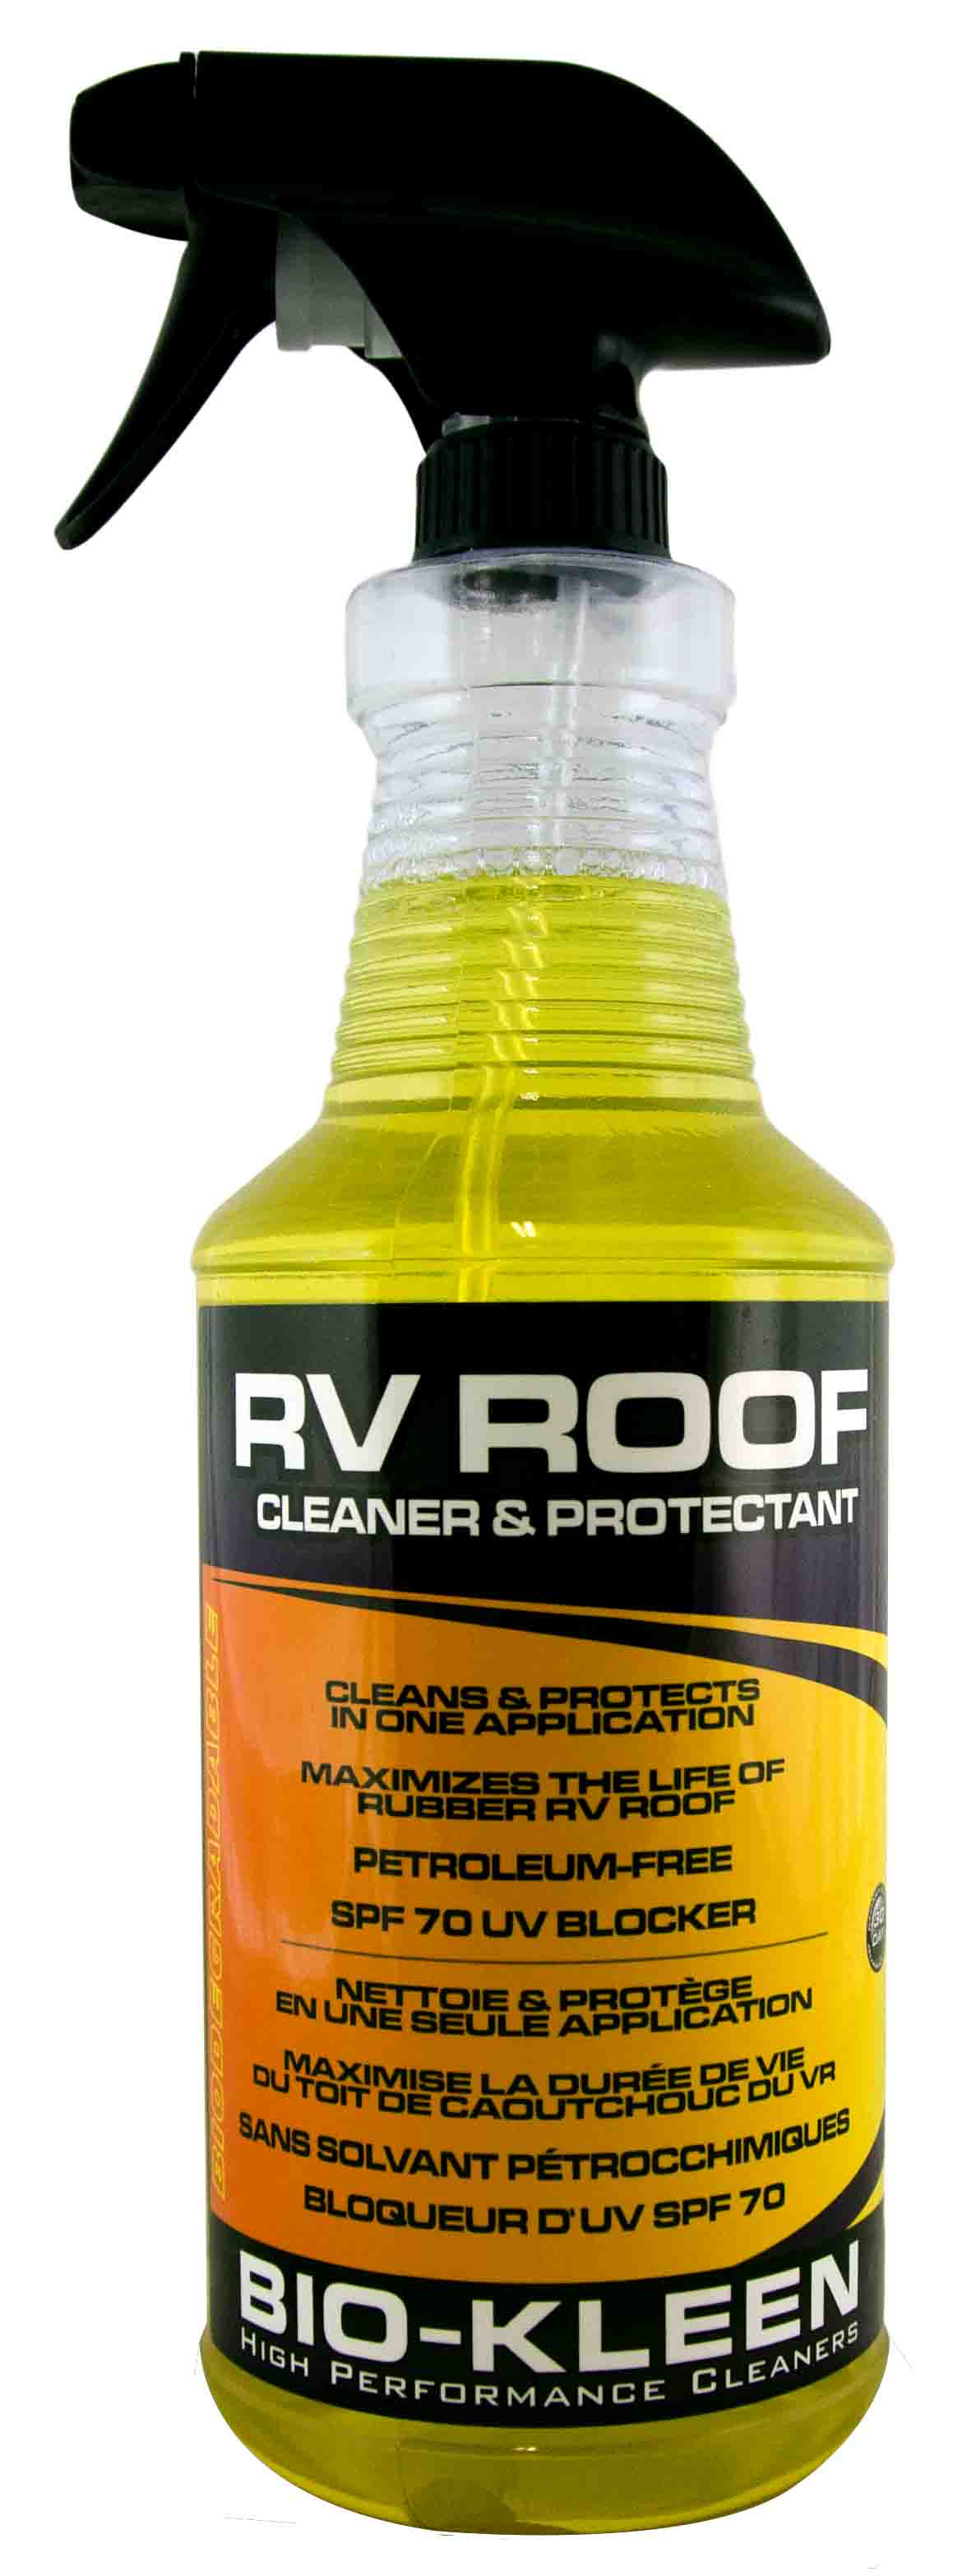 RV Roof Cleaner Protectant rv roof cleaner, rv rubber roof cleaner, rubber rv roof cleaner, rv roof protectant, rubber roof cleaner